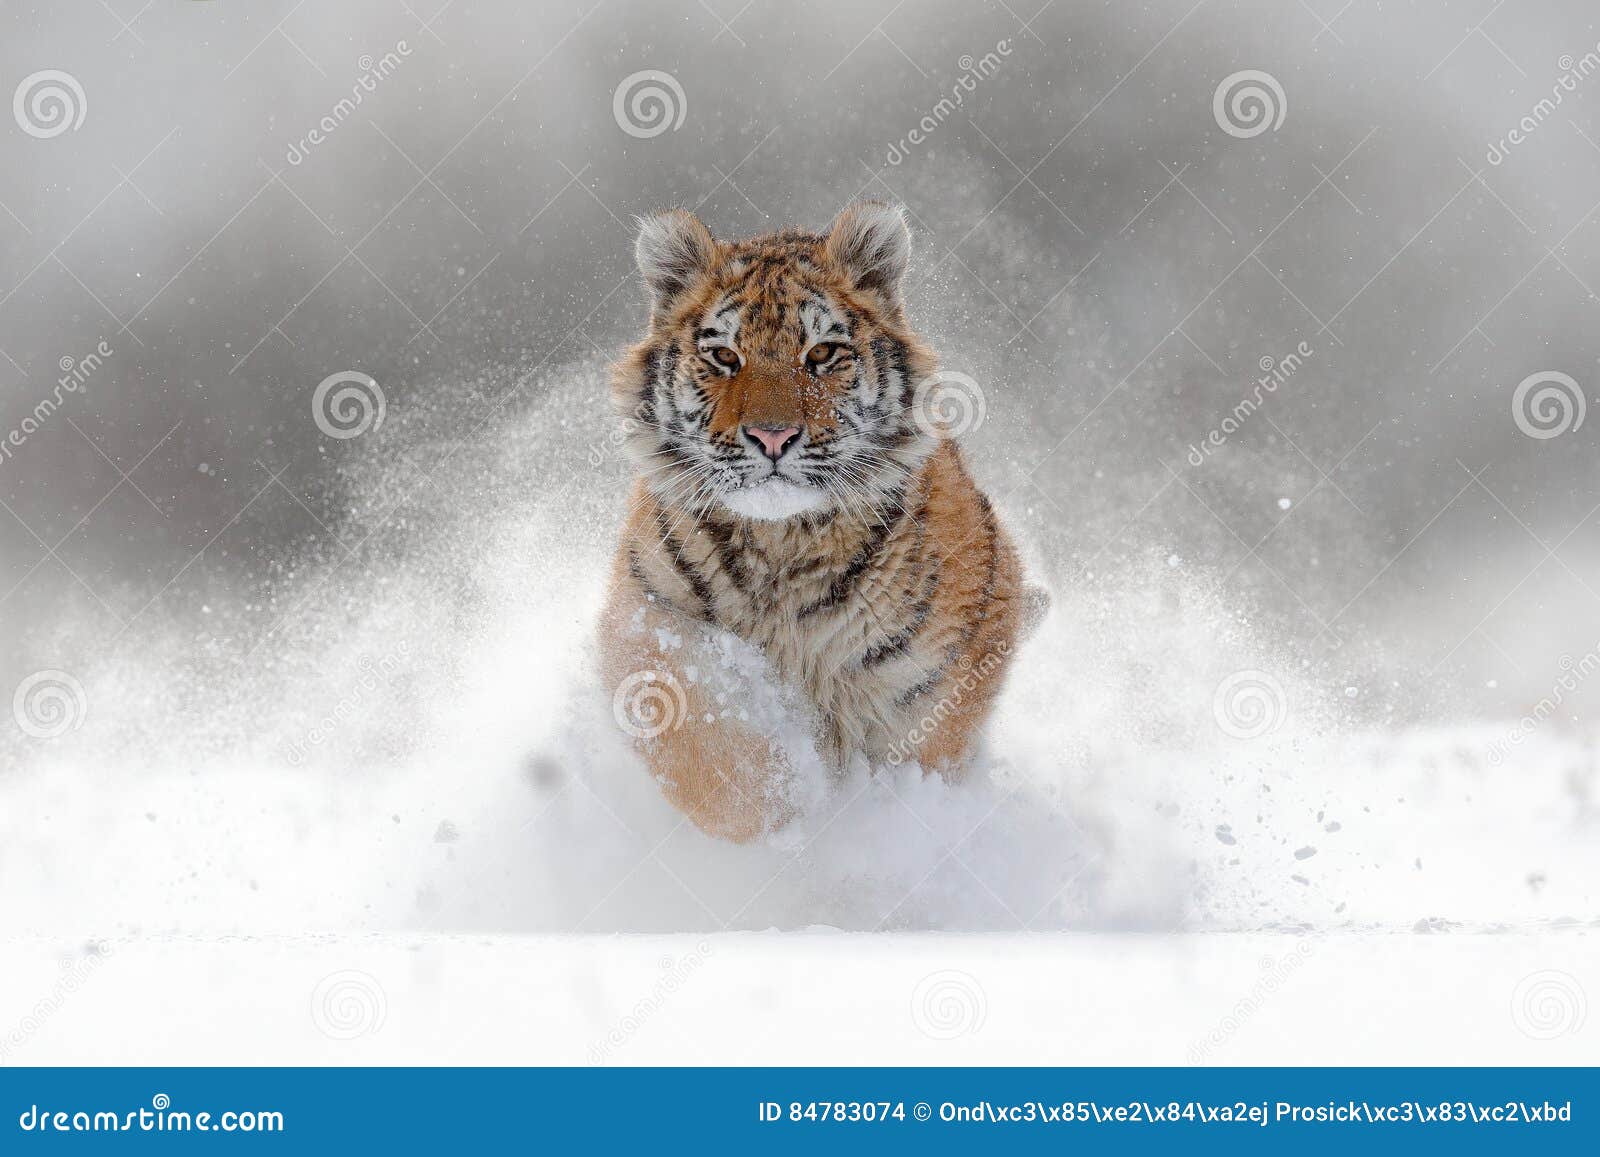 tiger in wild winter nature. amur tiger running in the snow. action wildlife scene with danger animal. cold winter in tajga, russ